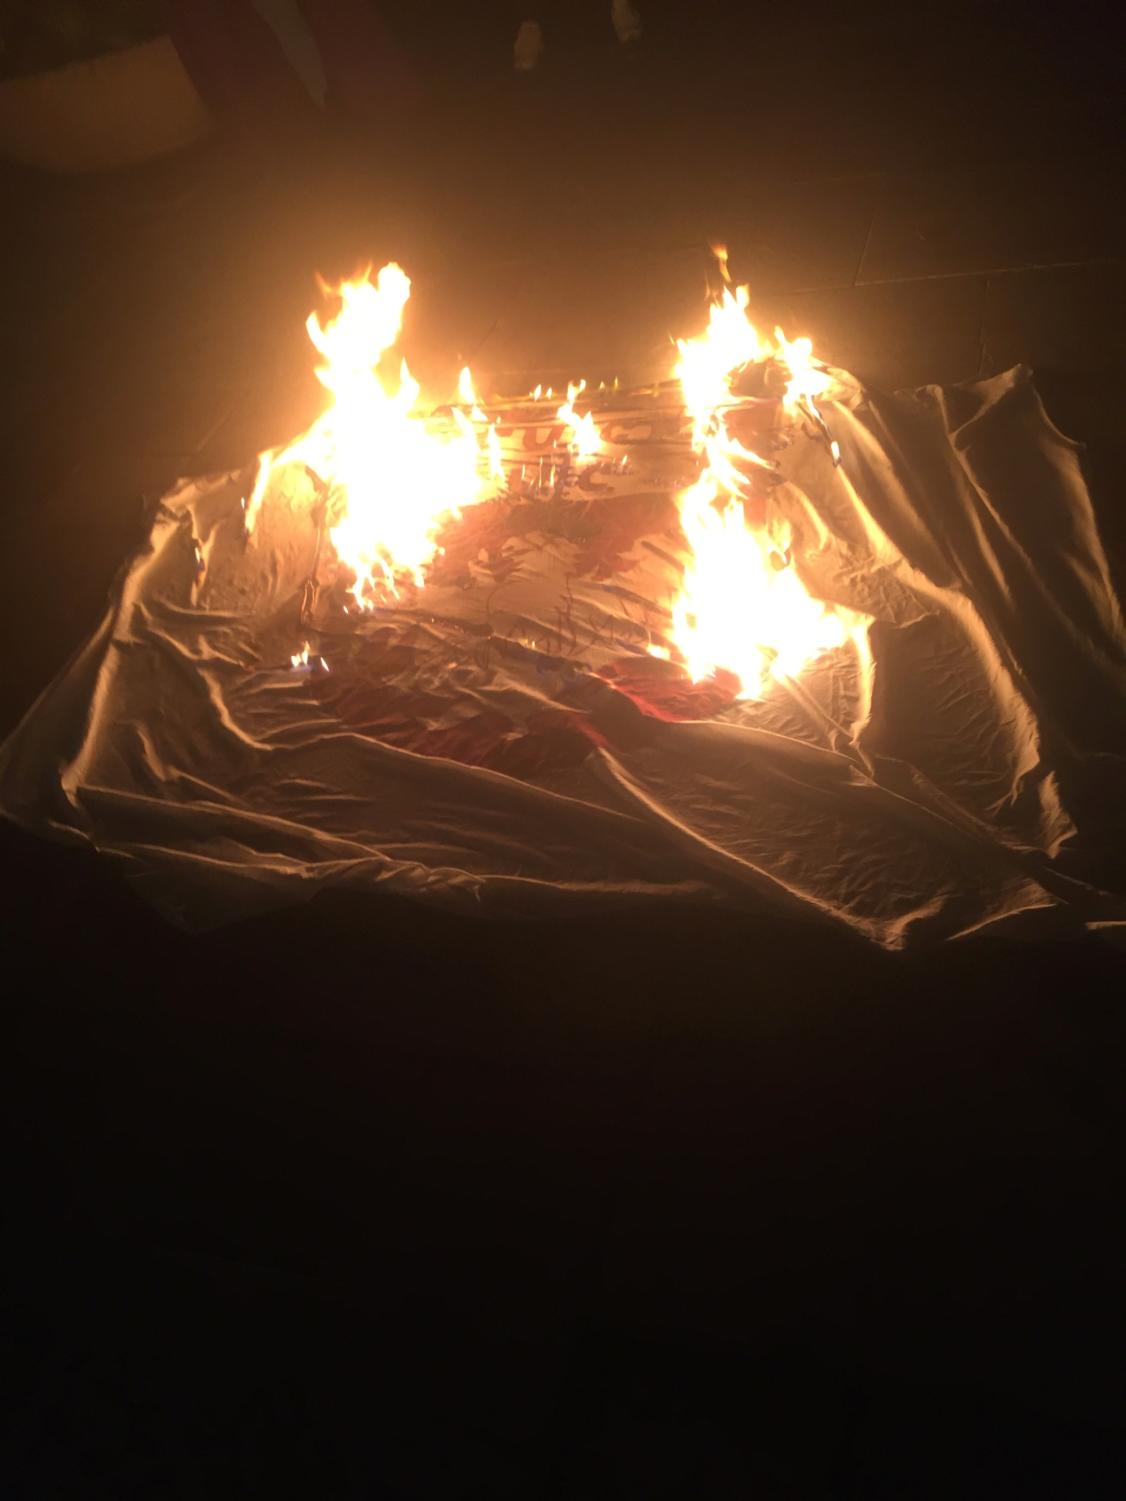 #CareNotCops burned a banner with a UChicago crest on it as part of their Halloween night rally.